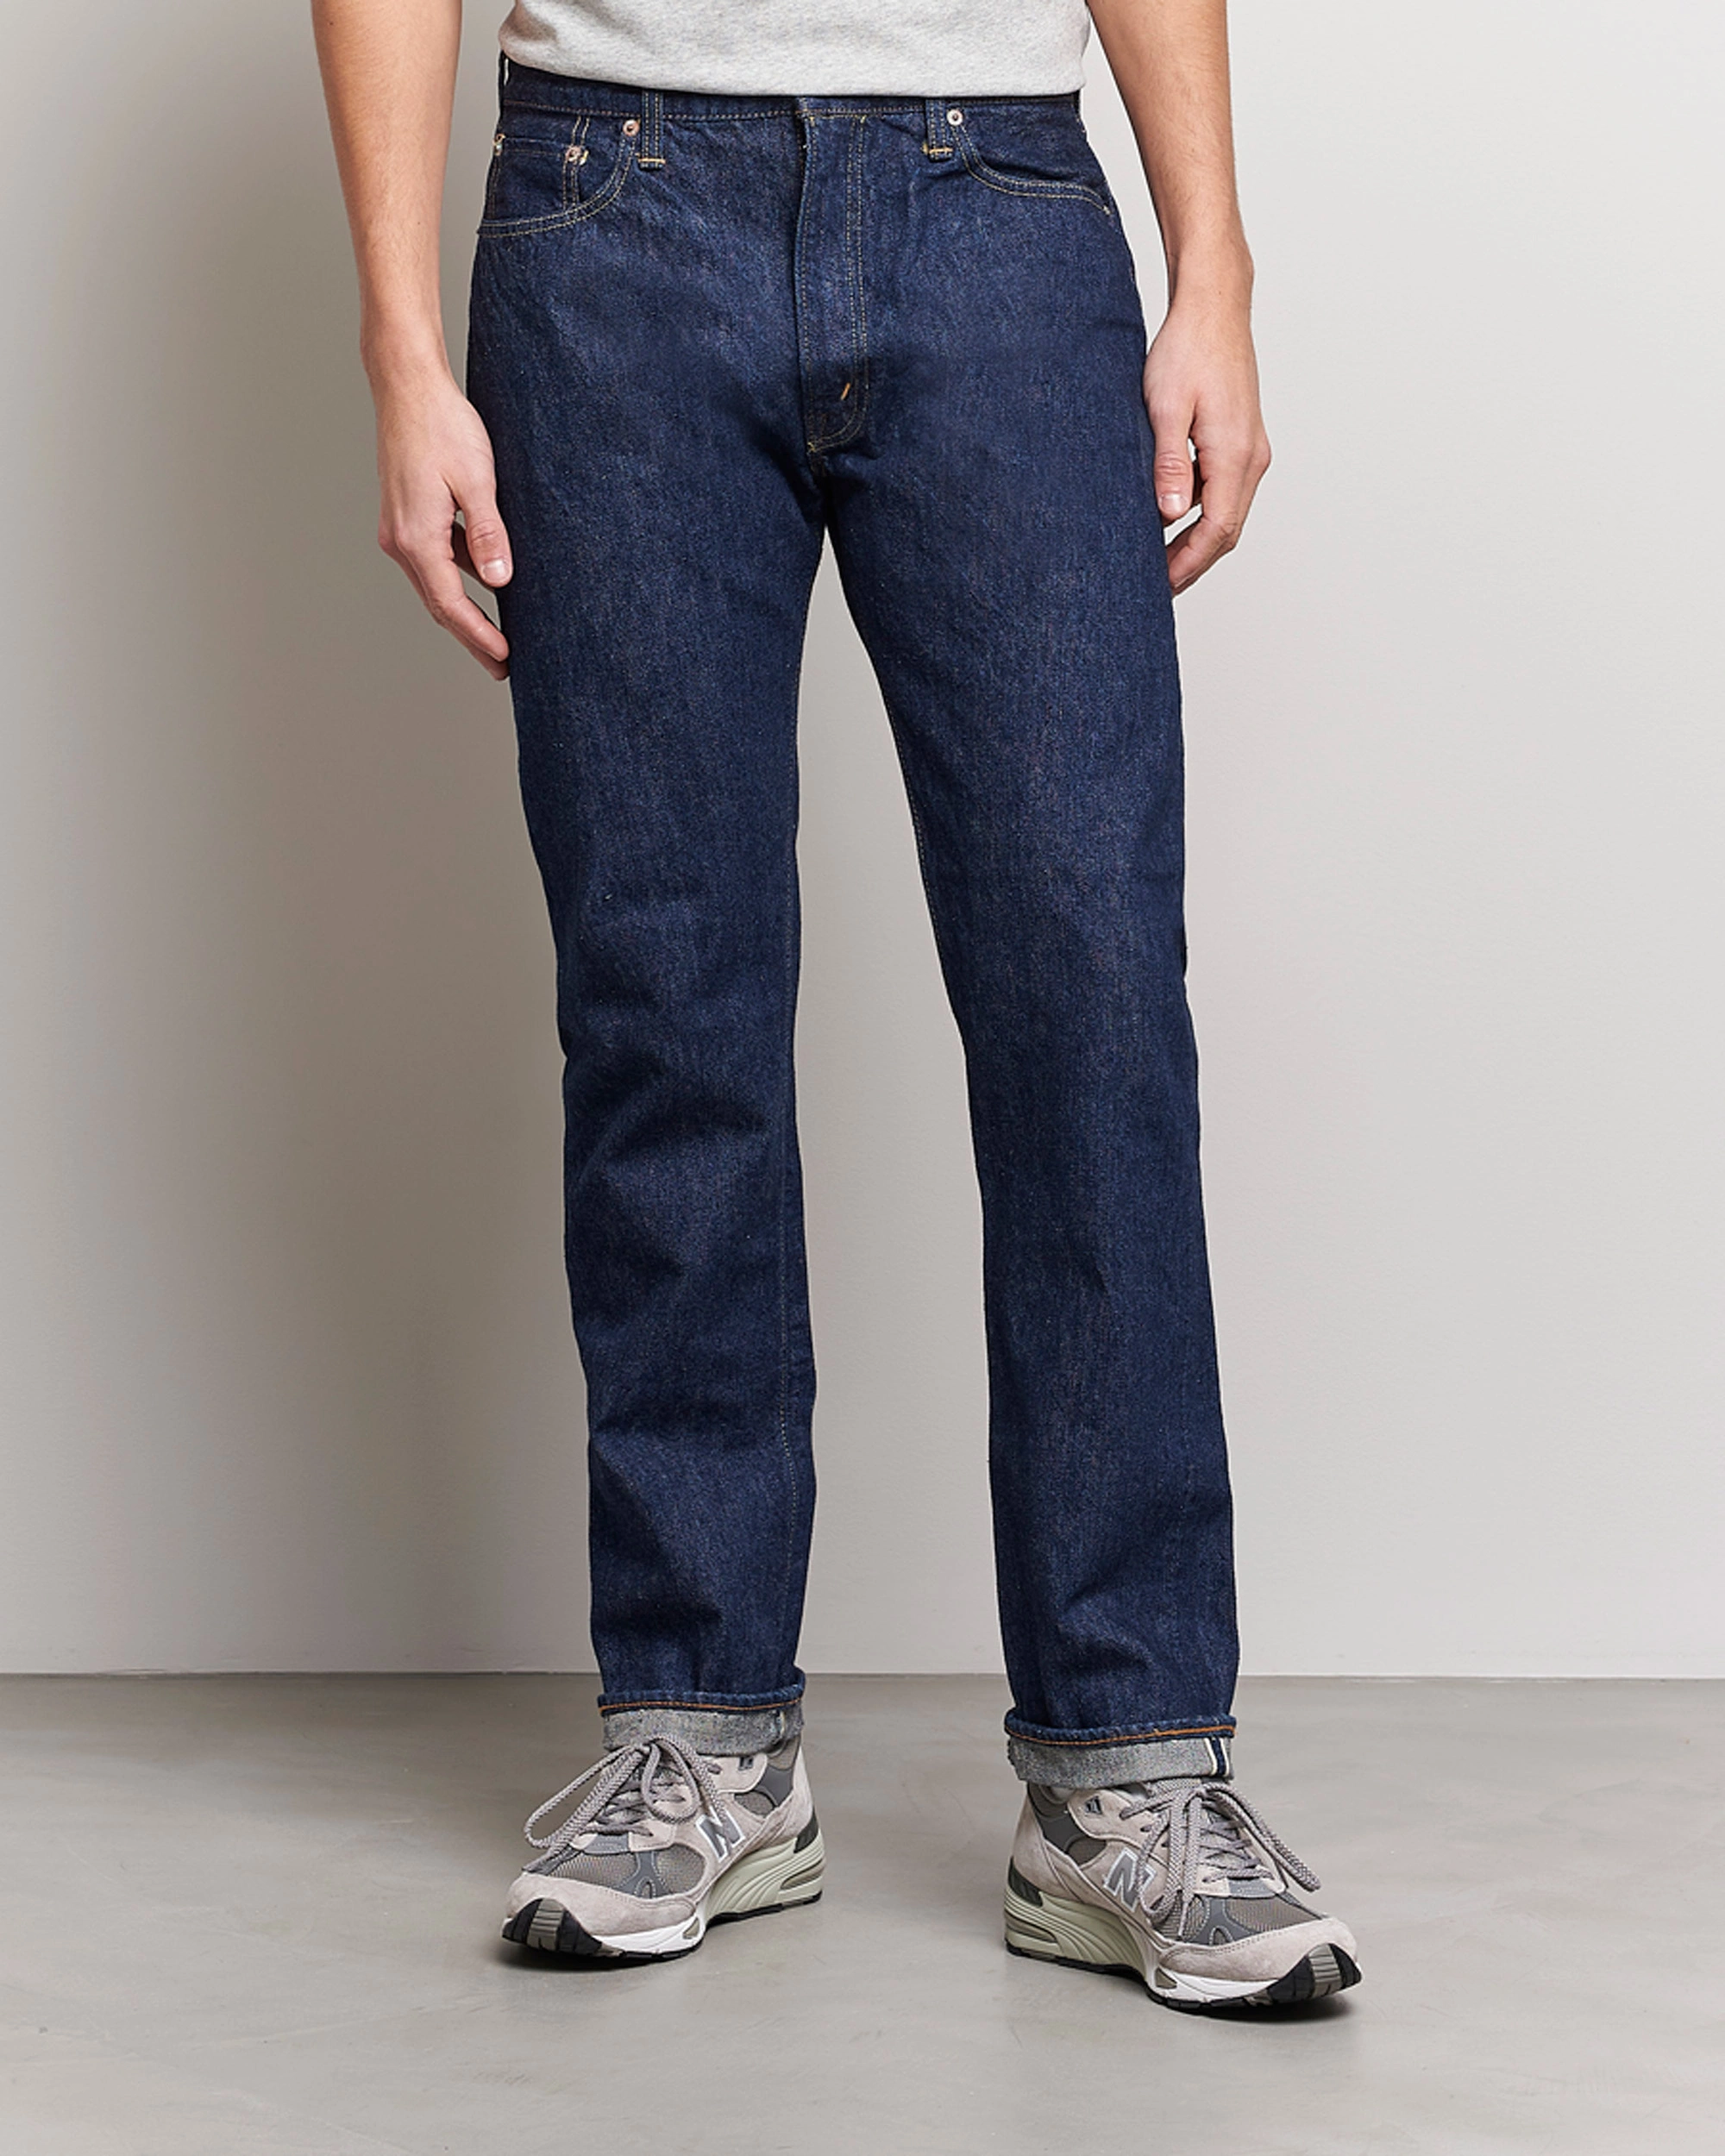 Herren | Straight leg | orSlow | Tapered Fit 107 Selvedge Jeans One Wash